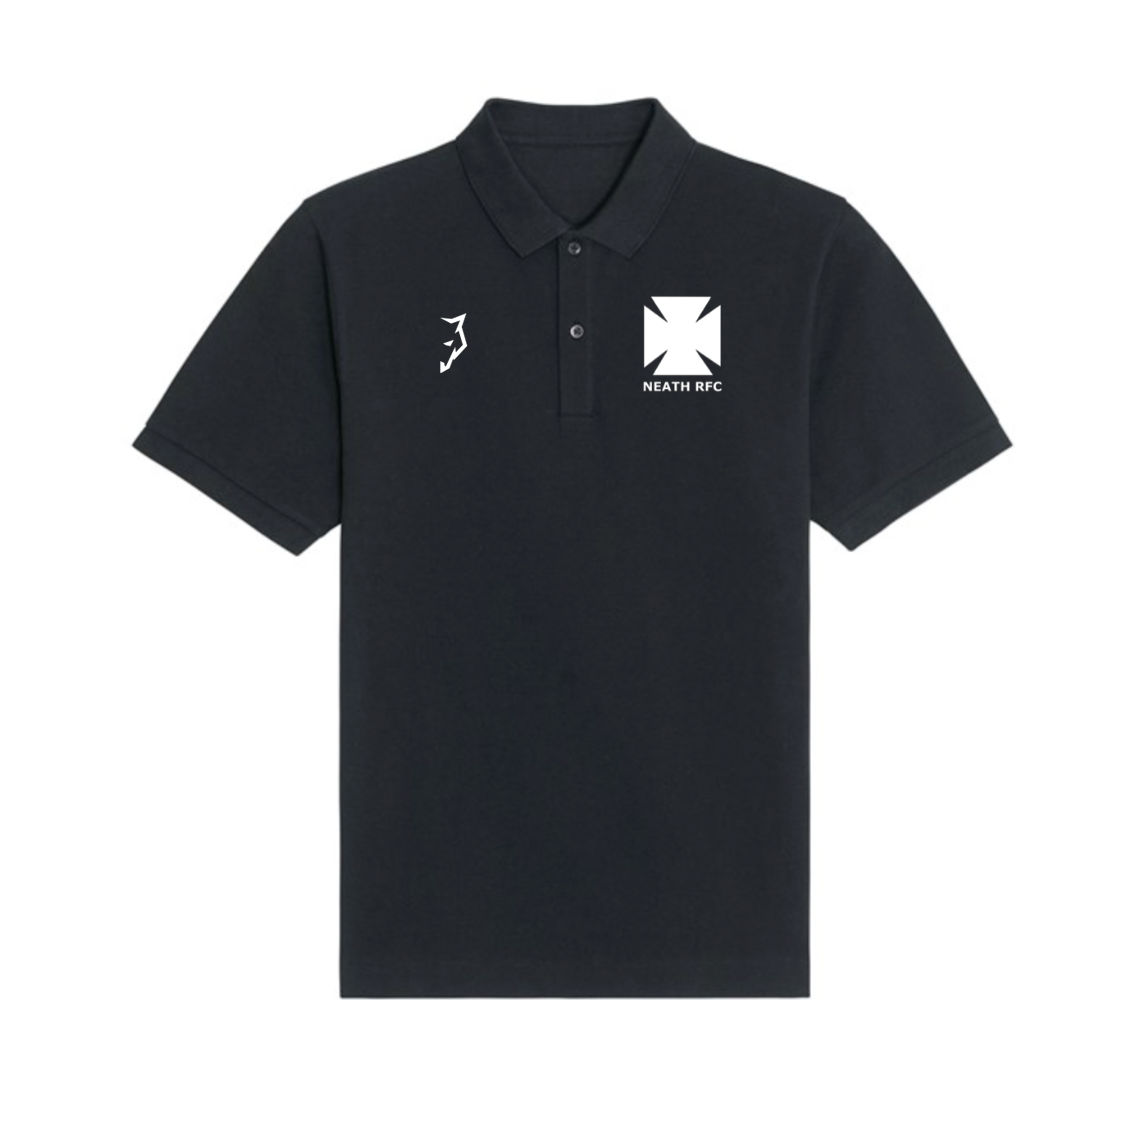 NEATH RFC - Supporters Polo